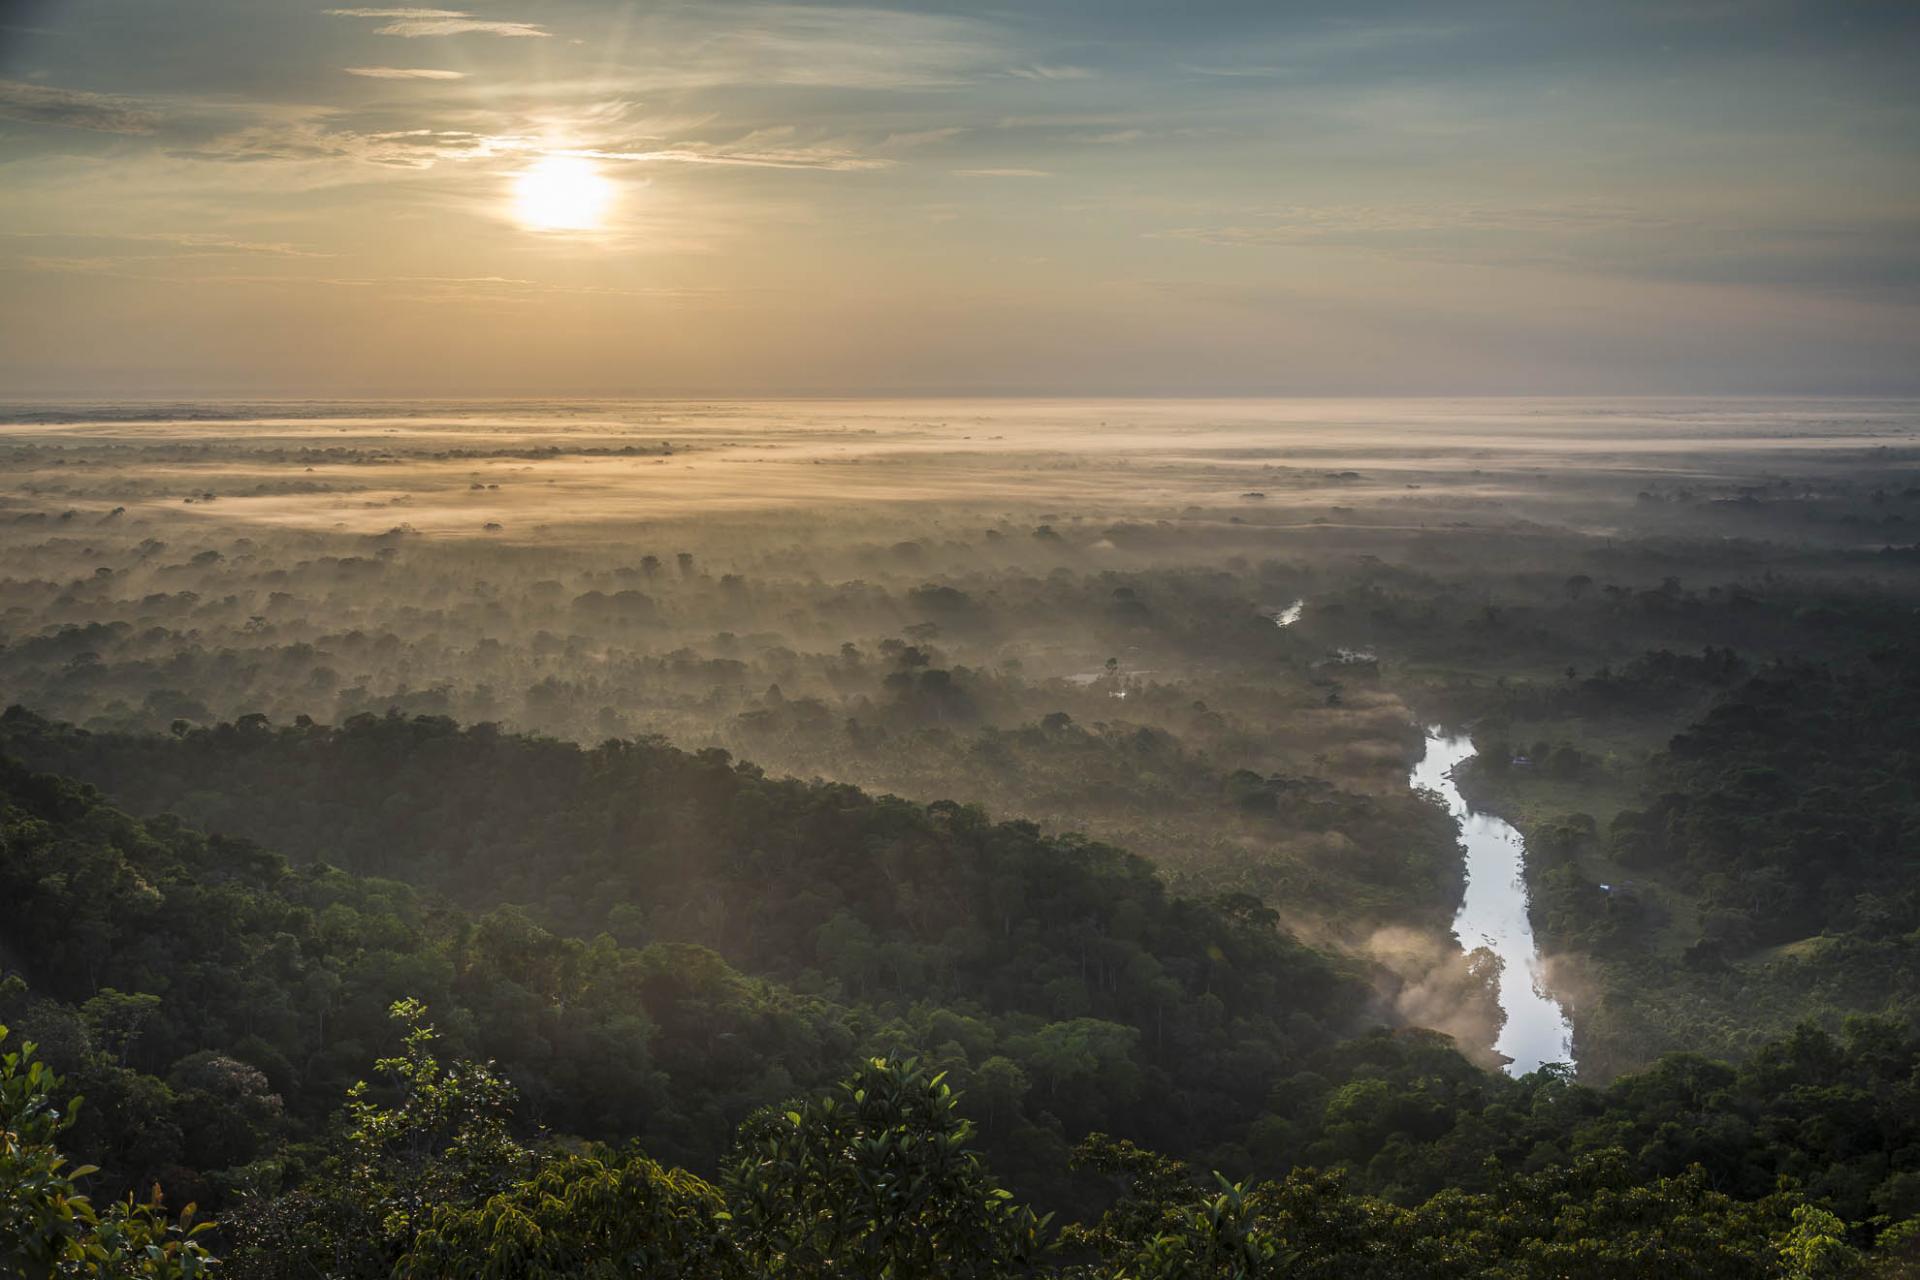 Discover the magic of the Amazon in Brazil on the Rota 174